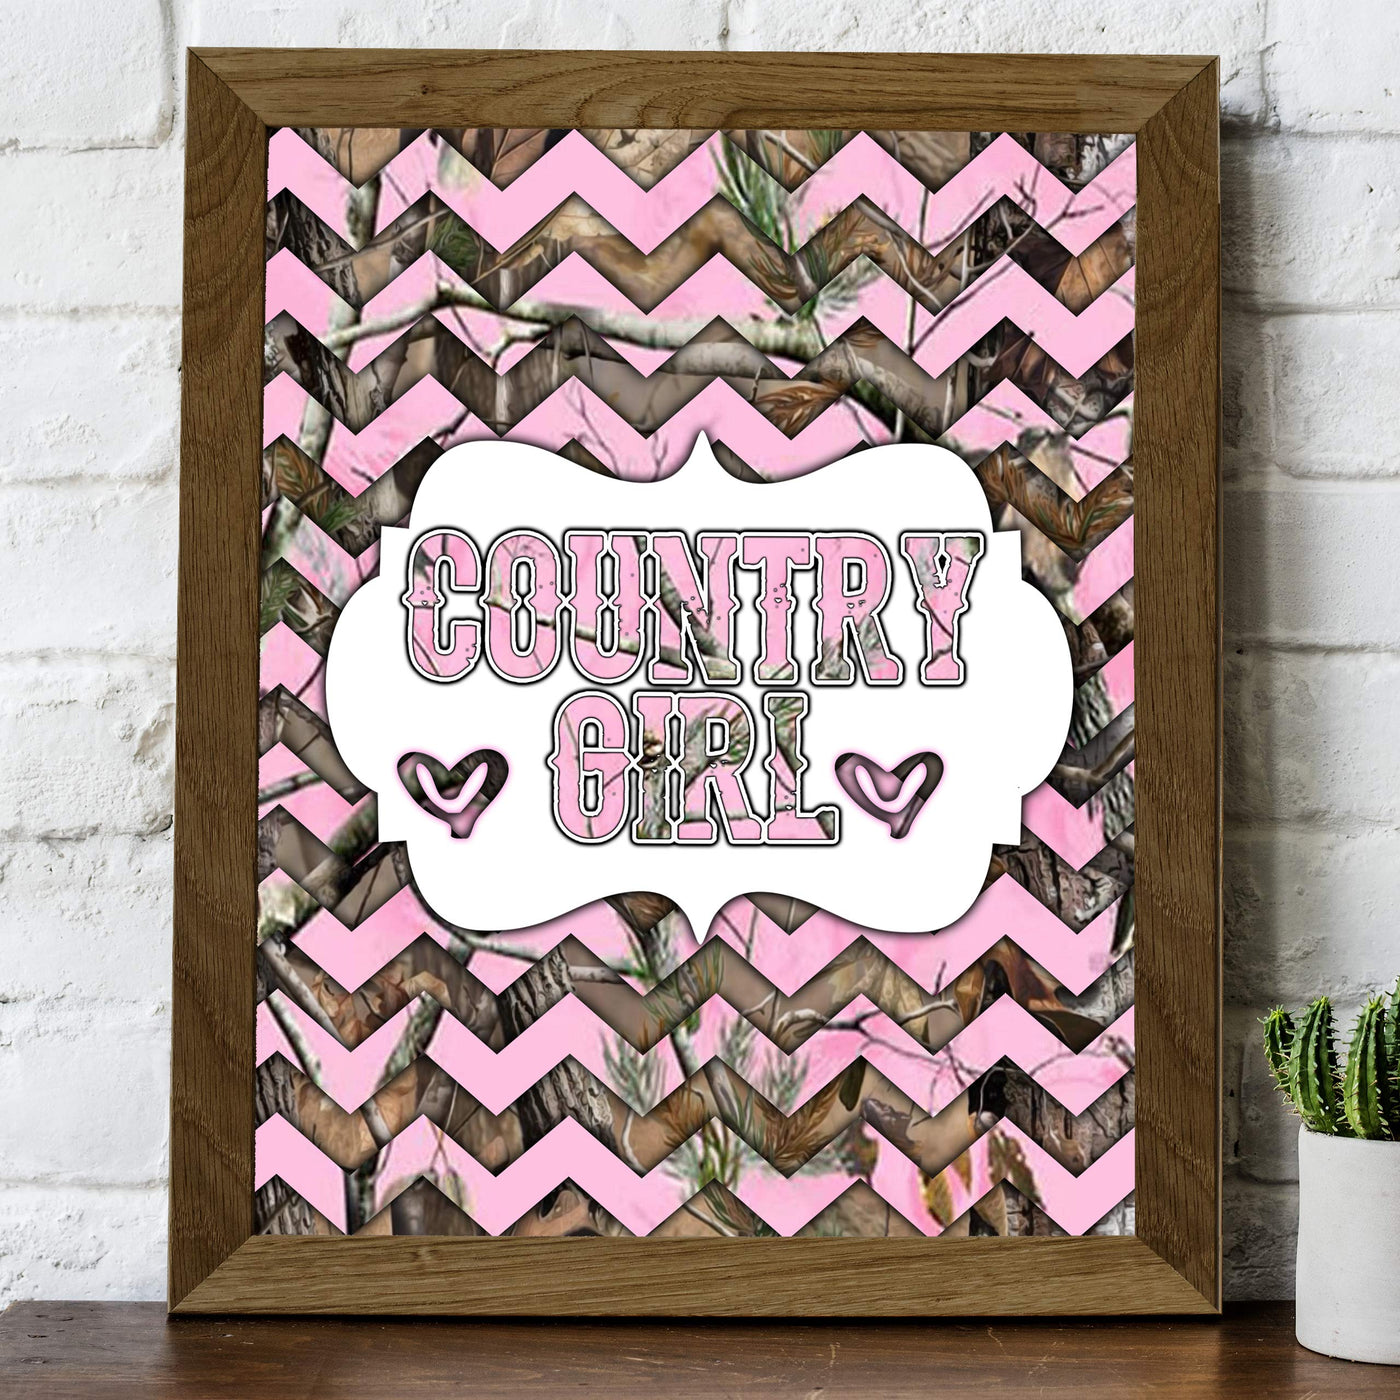 Country Girl -Rustic Inspirational Wall Art Sign -8 x 10" Western Chevron Pink Camo Print -Ready to Frame. Chic Decoration for Home-Office-Farmhouse-Dorm Decor. Cute Gift for All Southern Girls!